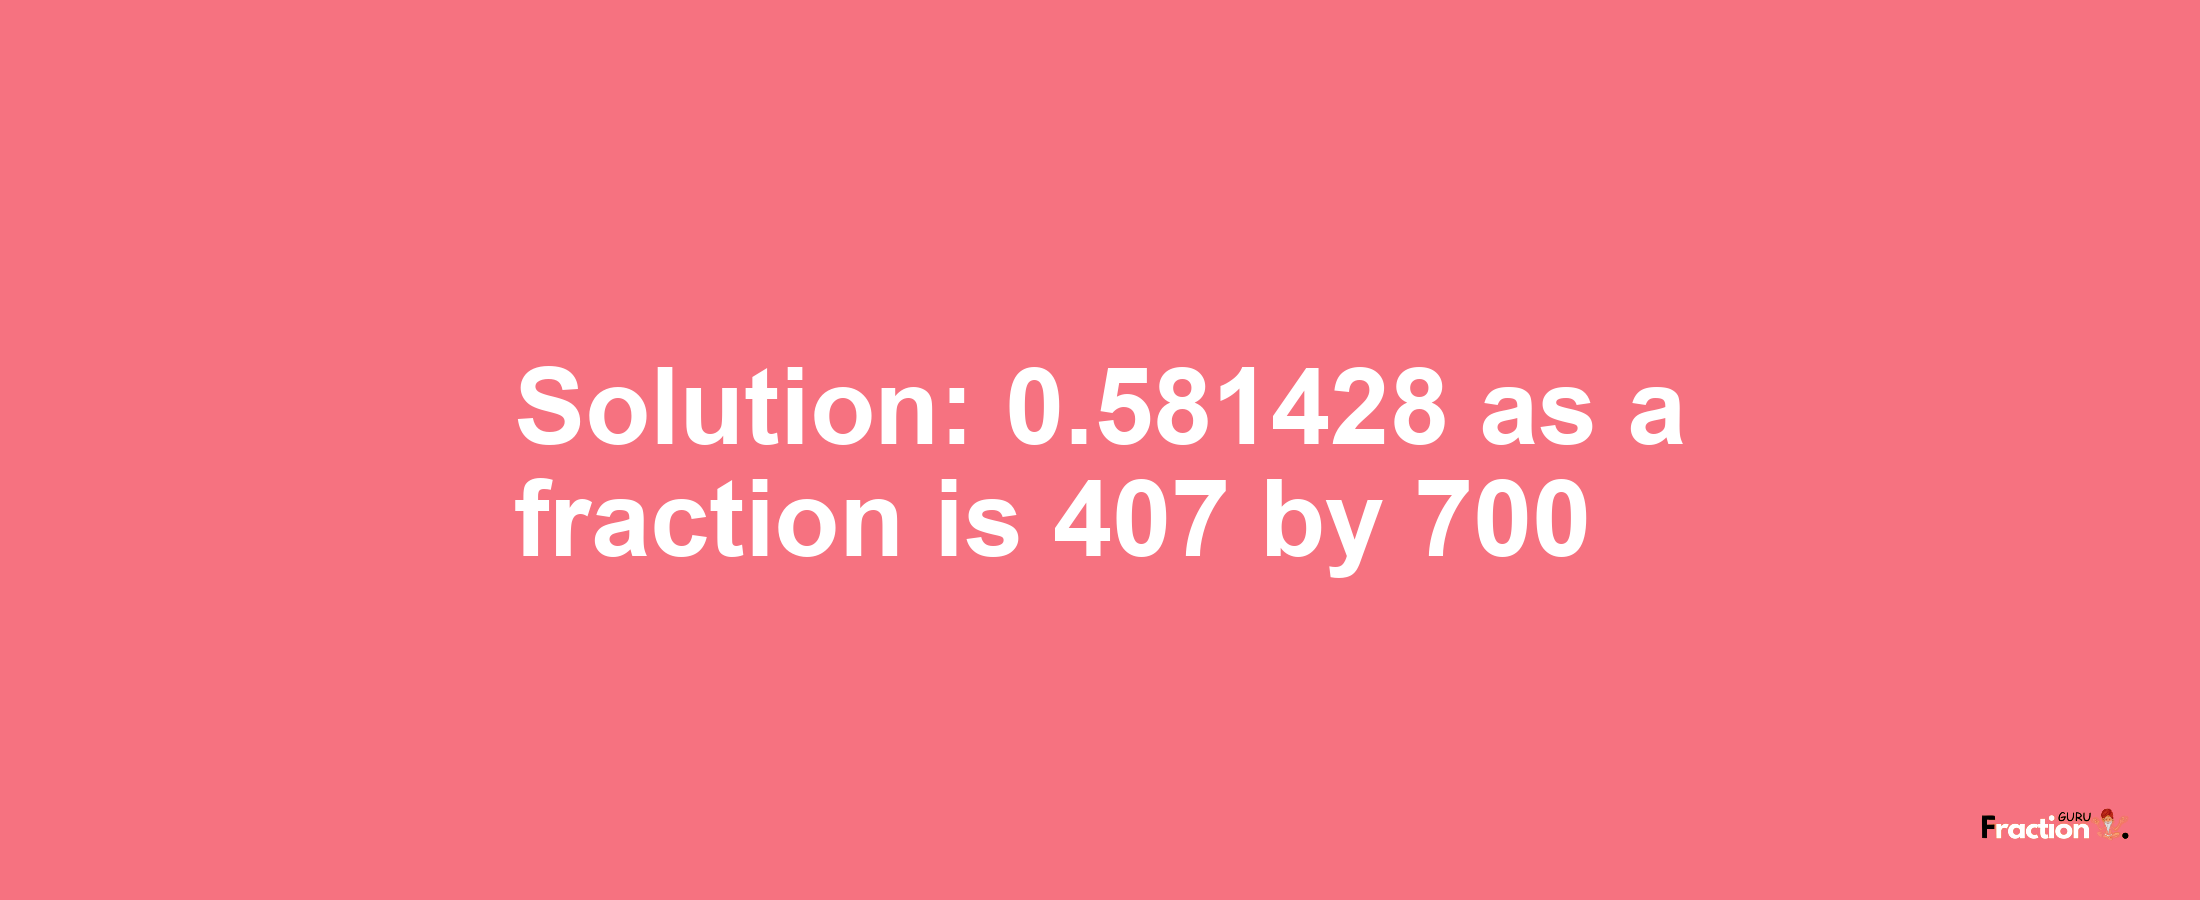 Solution:0.581428 as a fraction is 407/700